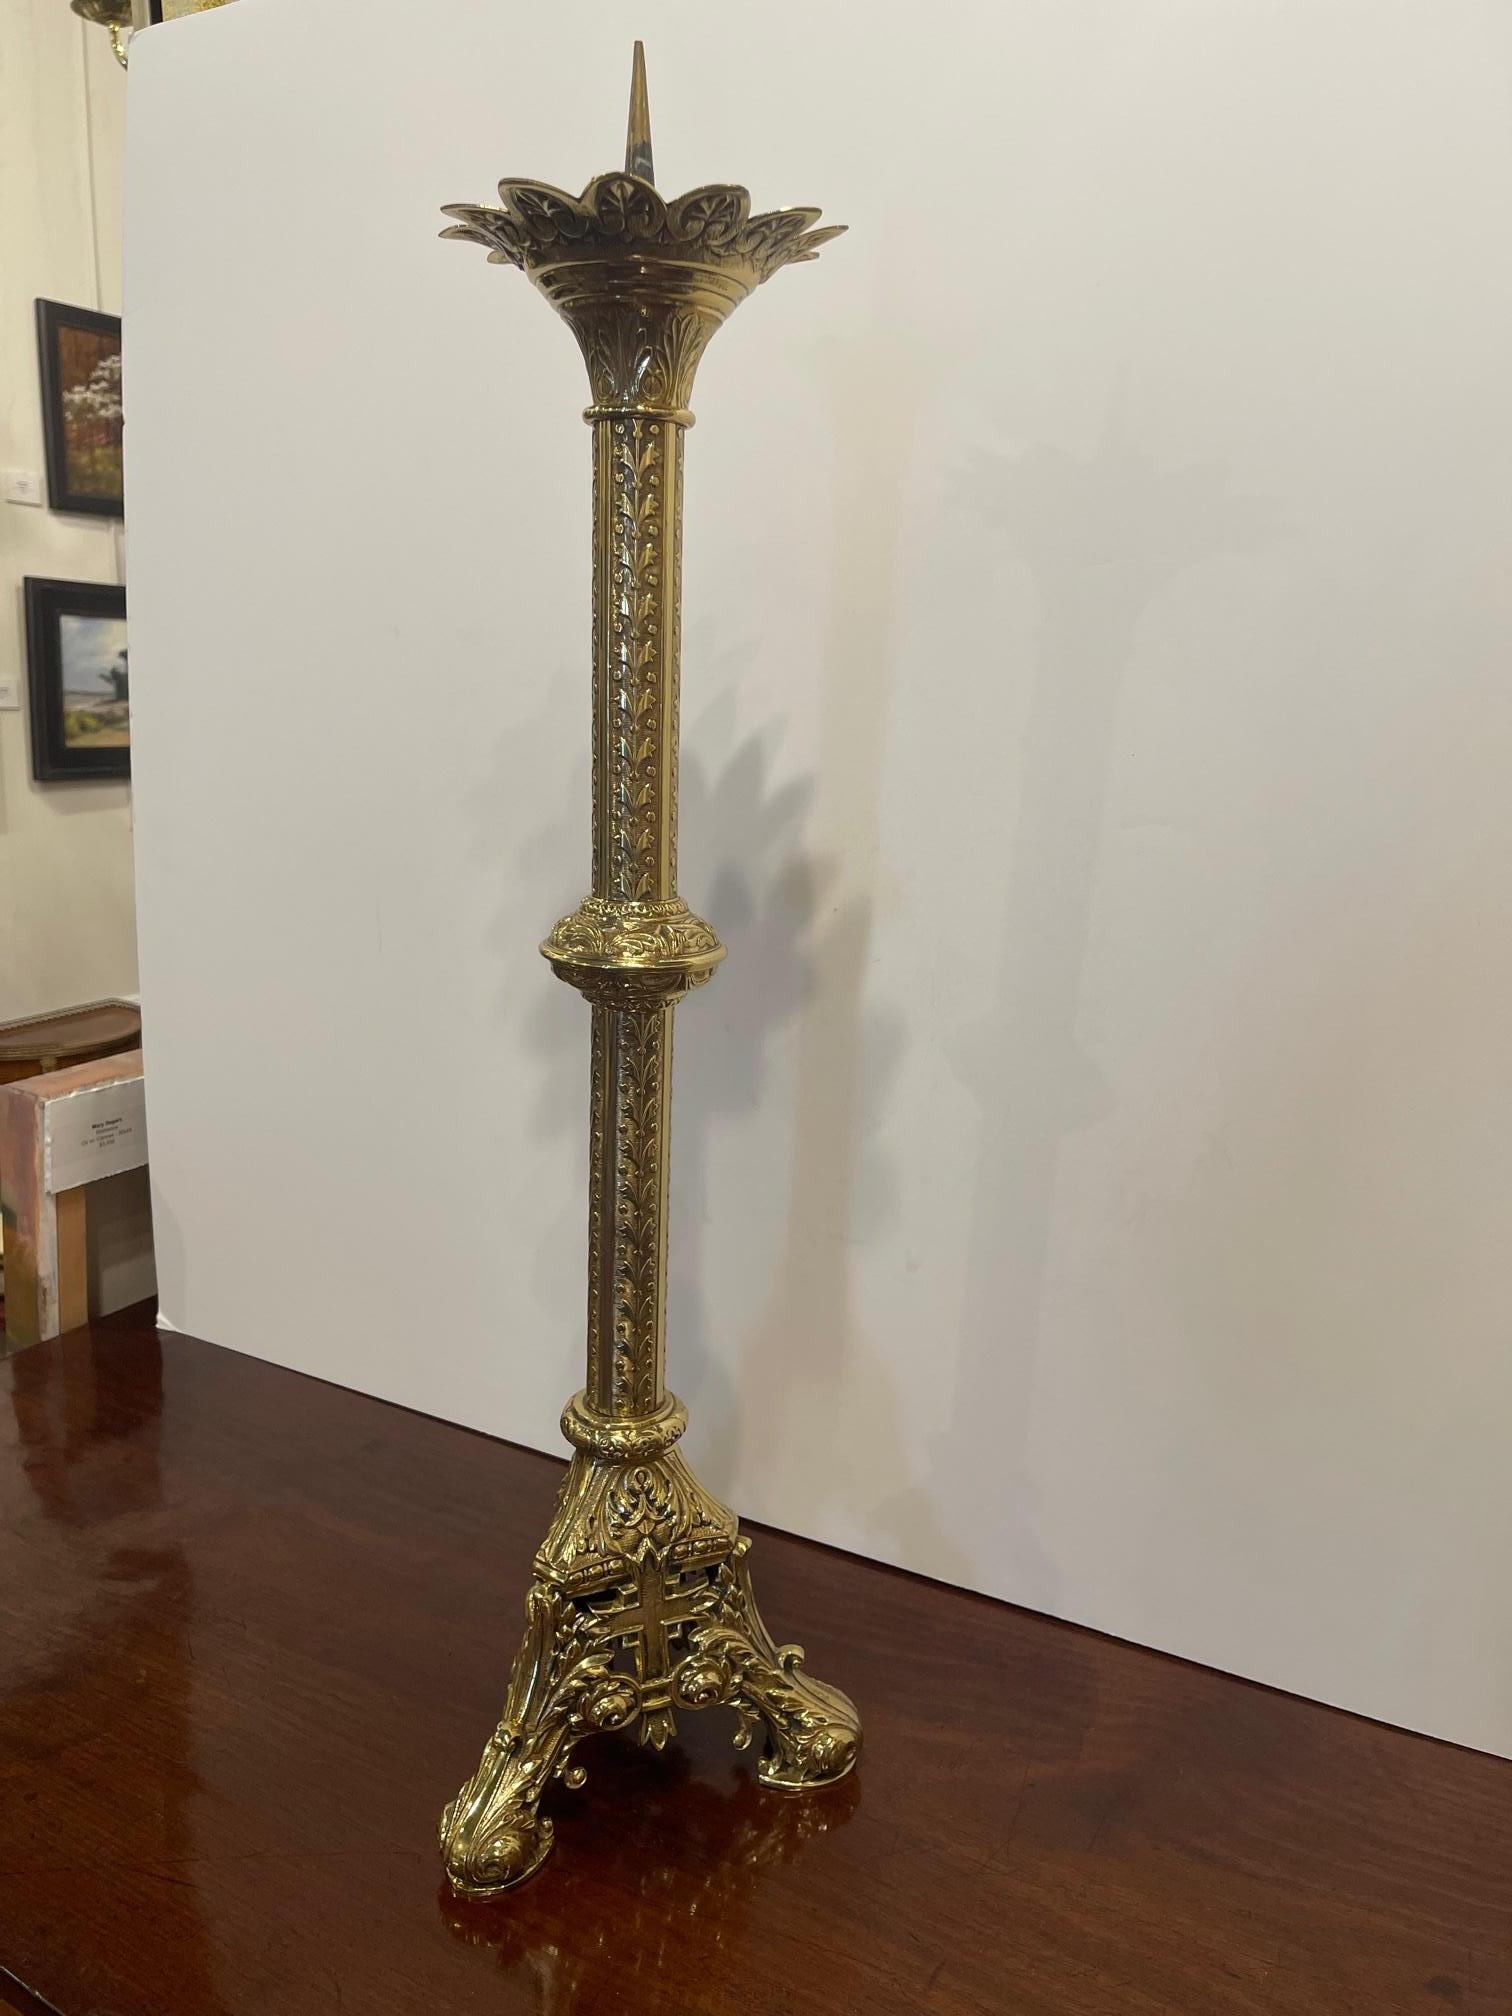 French Polished Brass Decorative Pricket or Candlestick, 19th Century In Good Condition For Sale In Savannah, GA